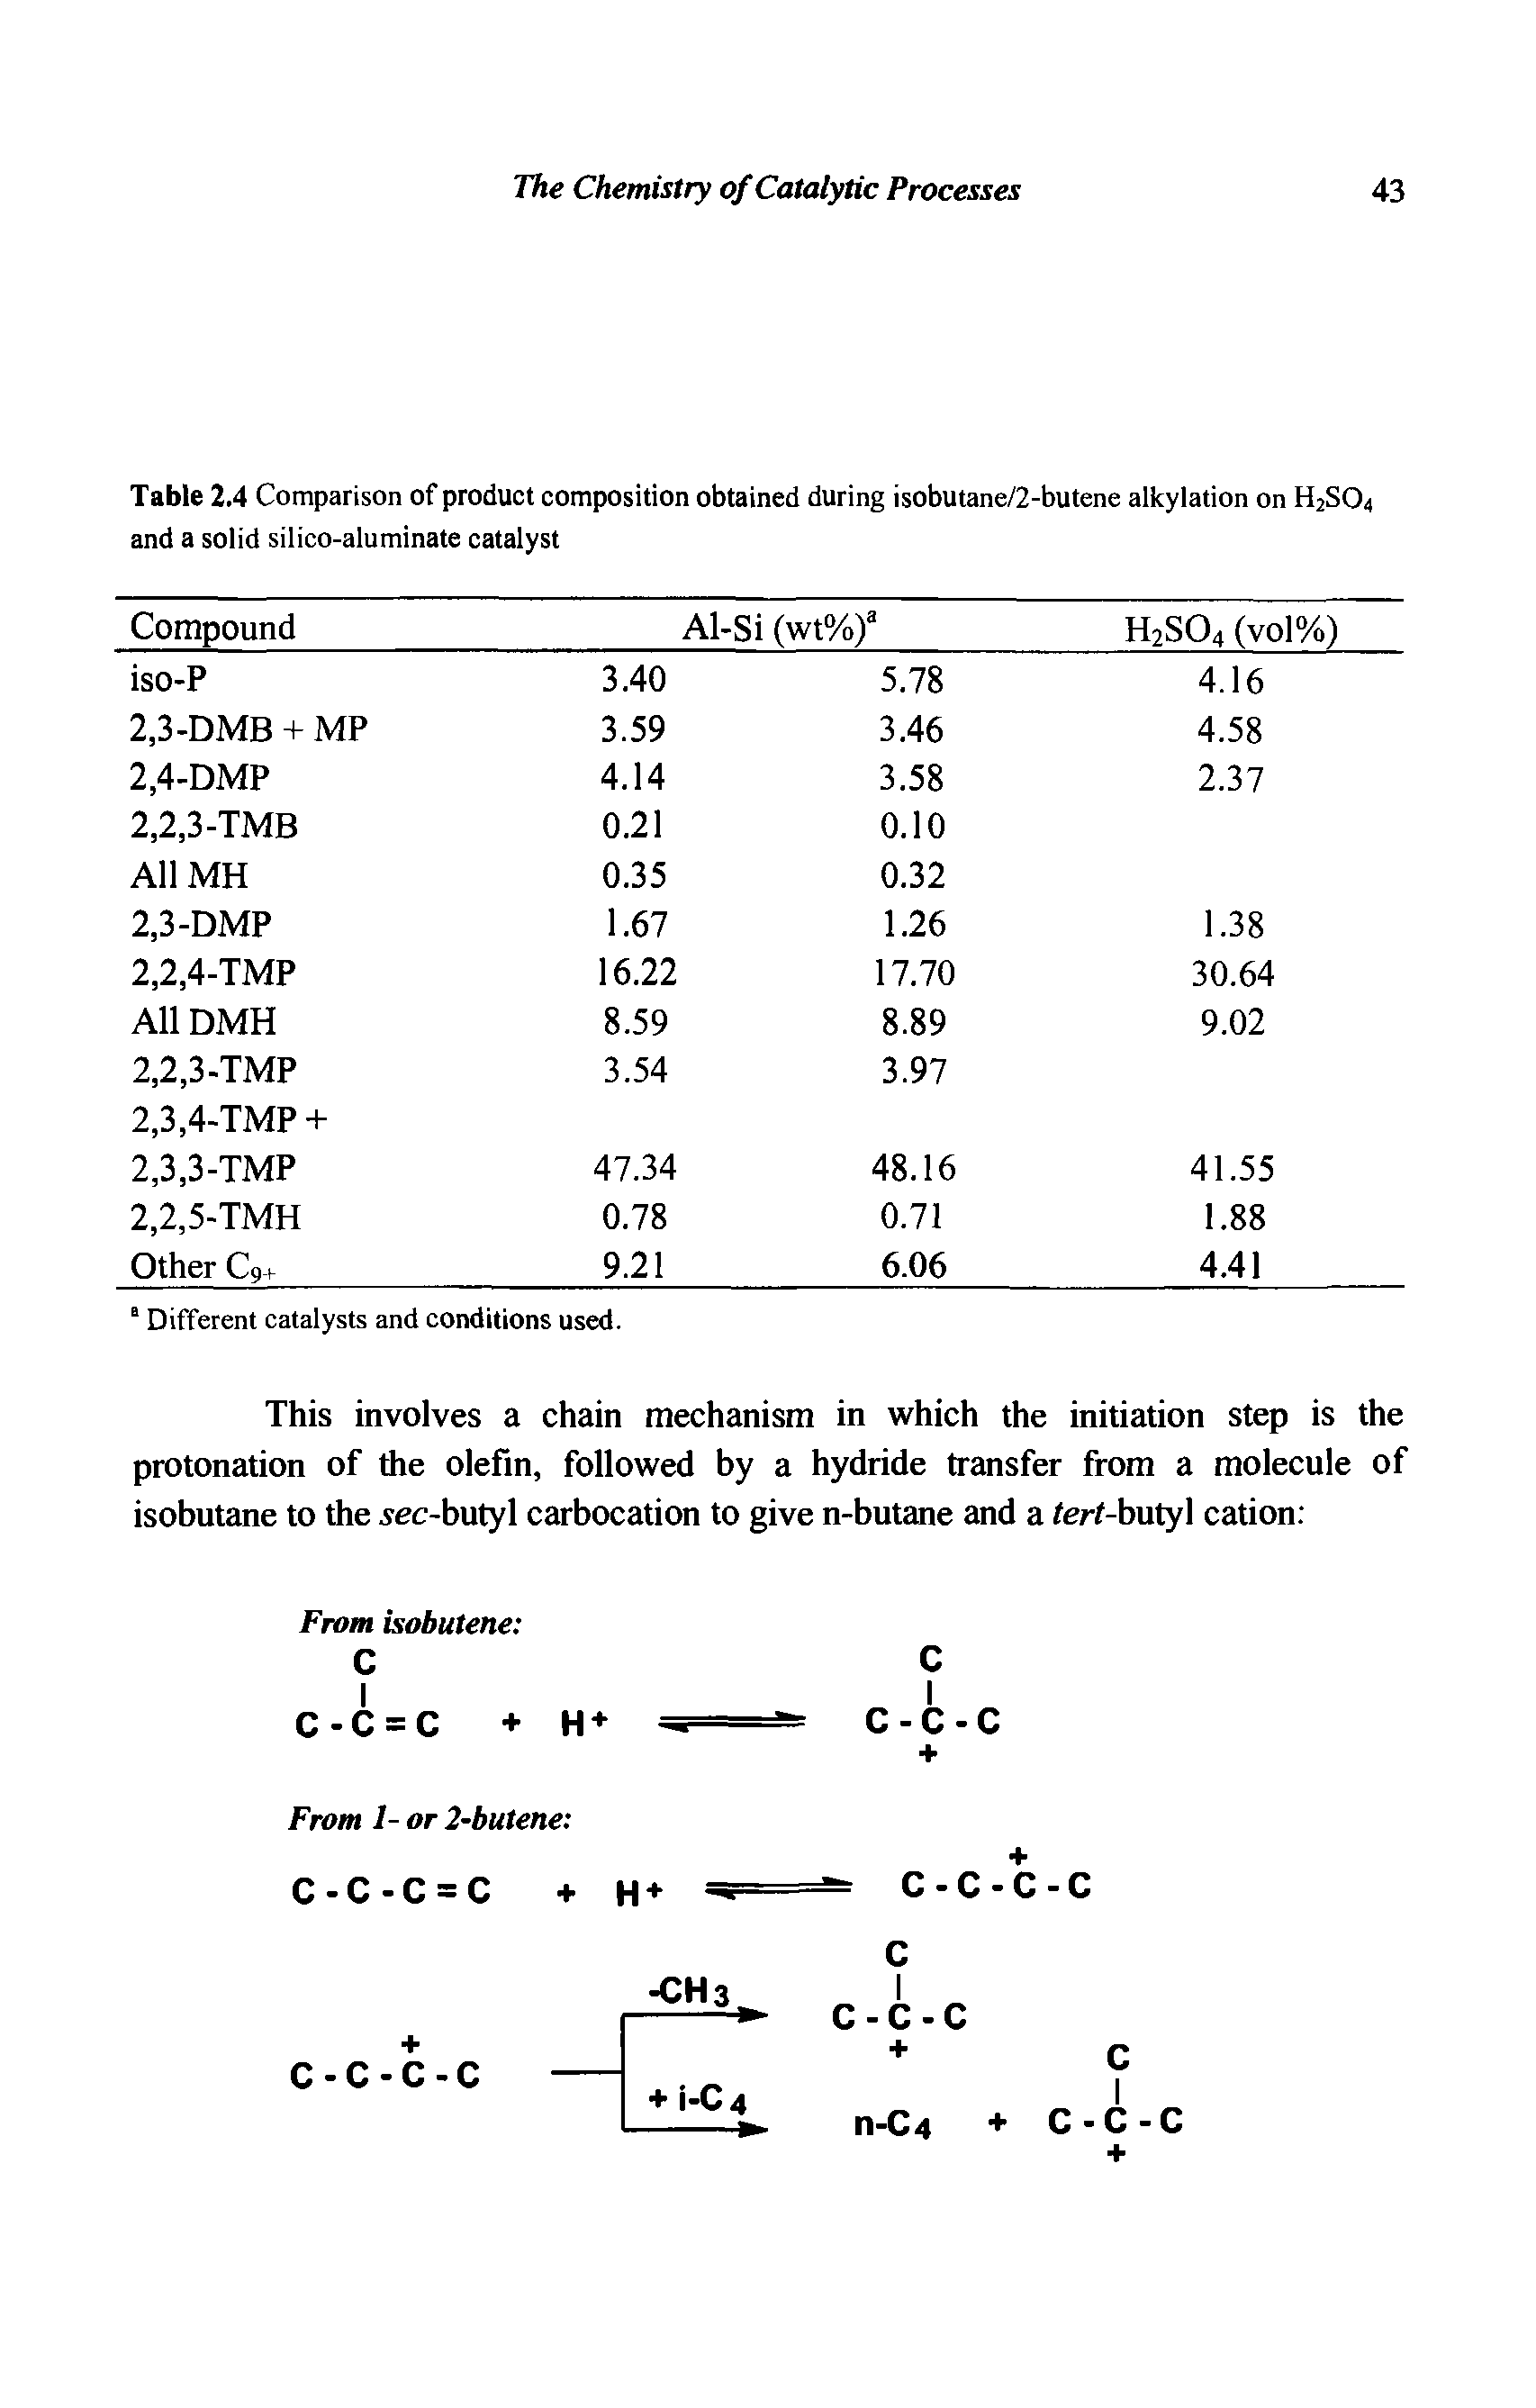 Table 2.4 Comparison of product composition obtained during isobutane/2-butene alkylation on H2S04 and a solid silico-aluminate catalyst...